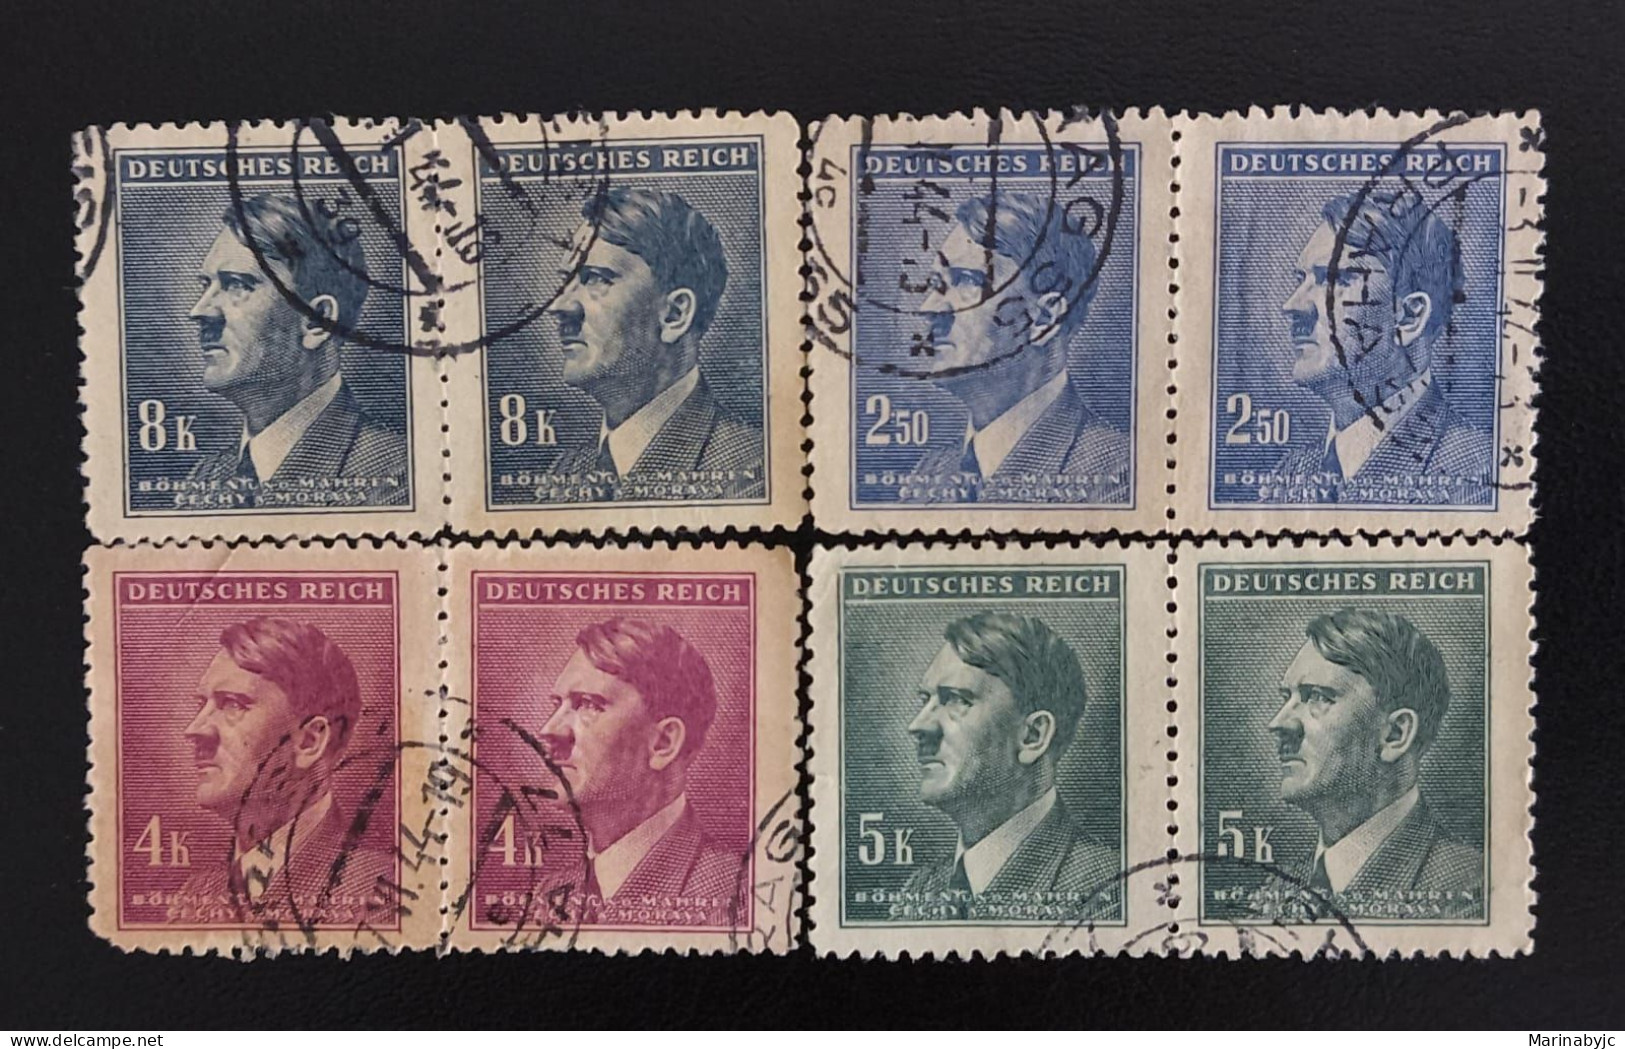 SD)GERMANY. HITLER. VARIOUS VALUES. DIFFERENT COLORS. USED. - Sammlungen